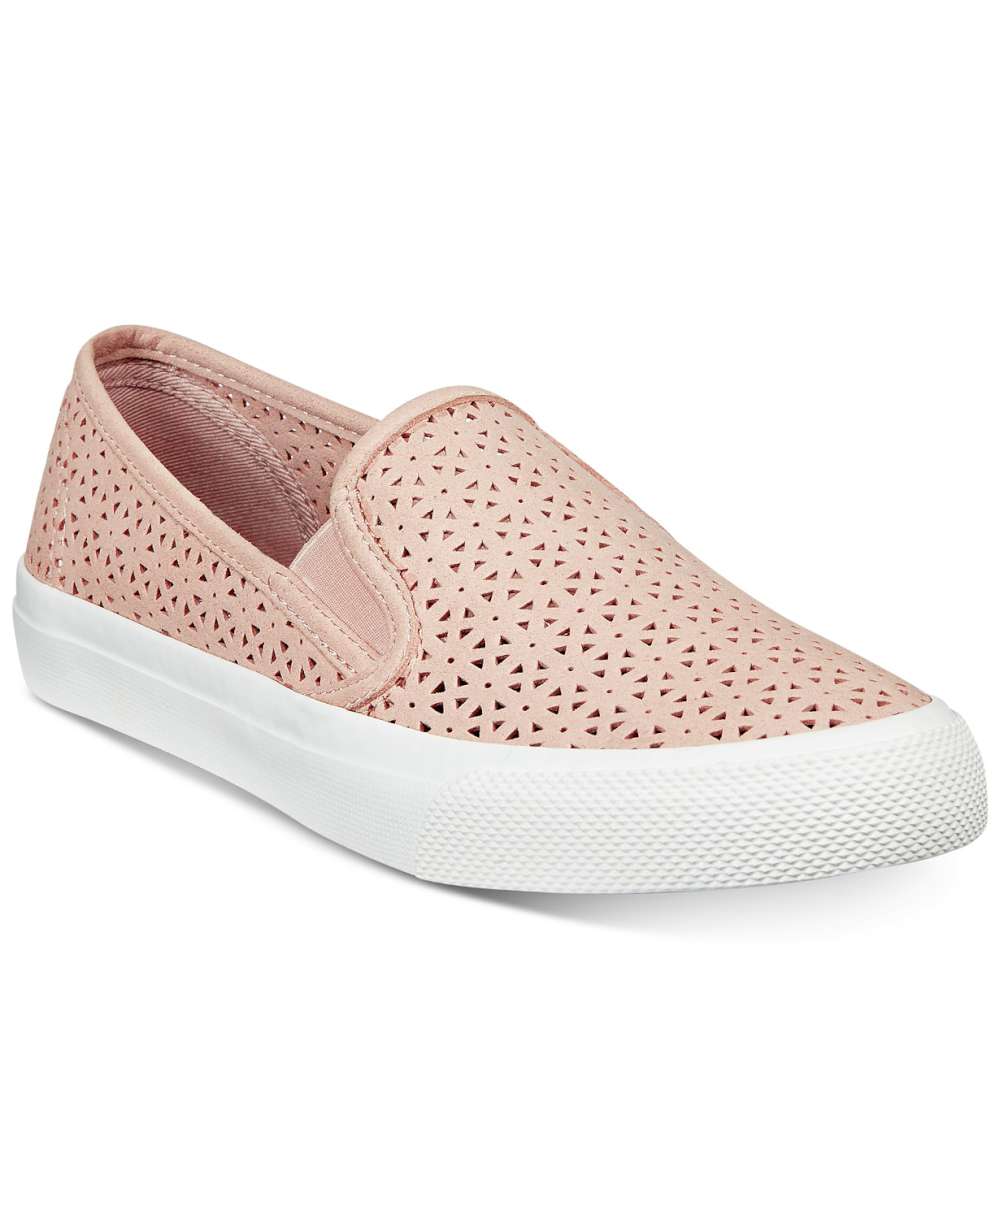 Sperry Womens Seaside Low Top Slip On Fashion Sneakers, Pink, Size 5.0 ...